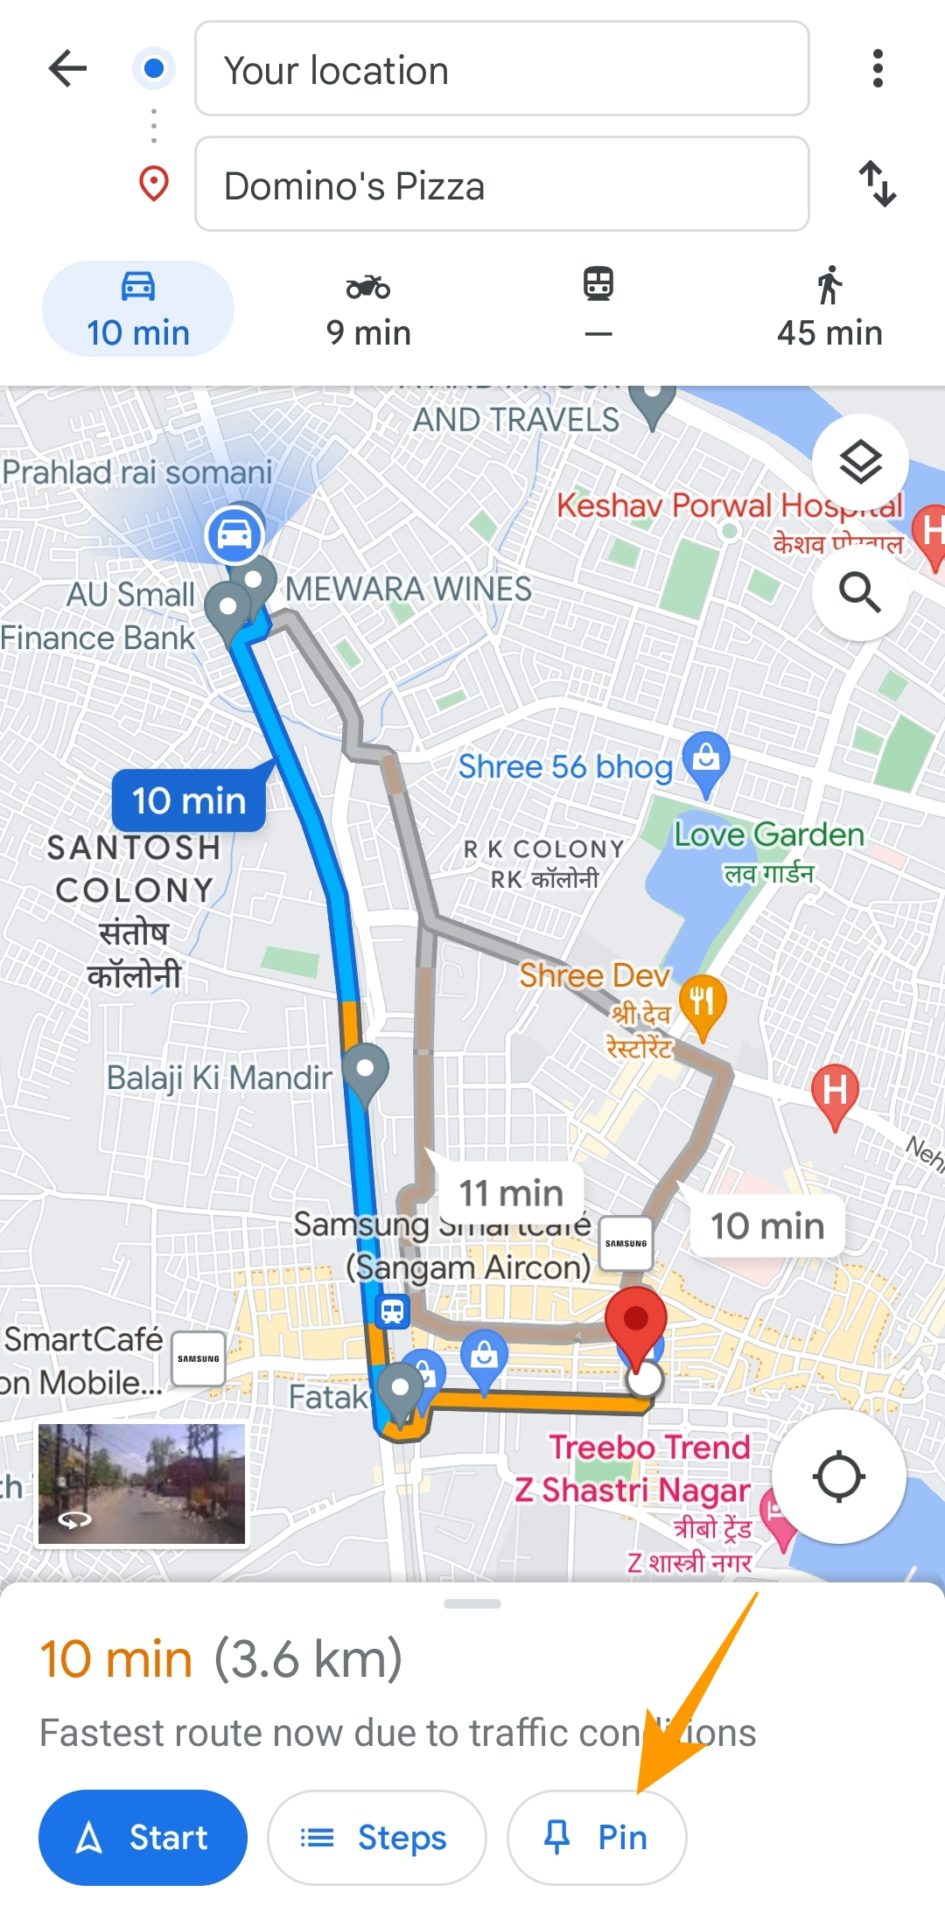 Pin option in Google Maps to save a route